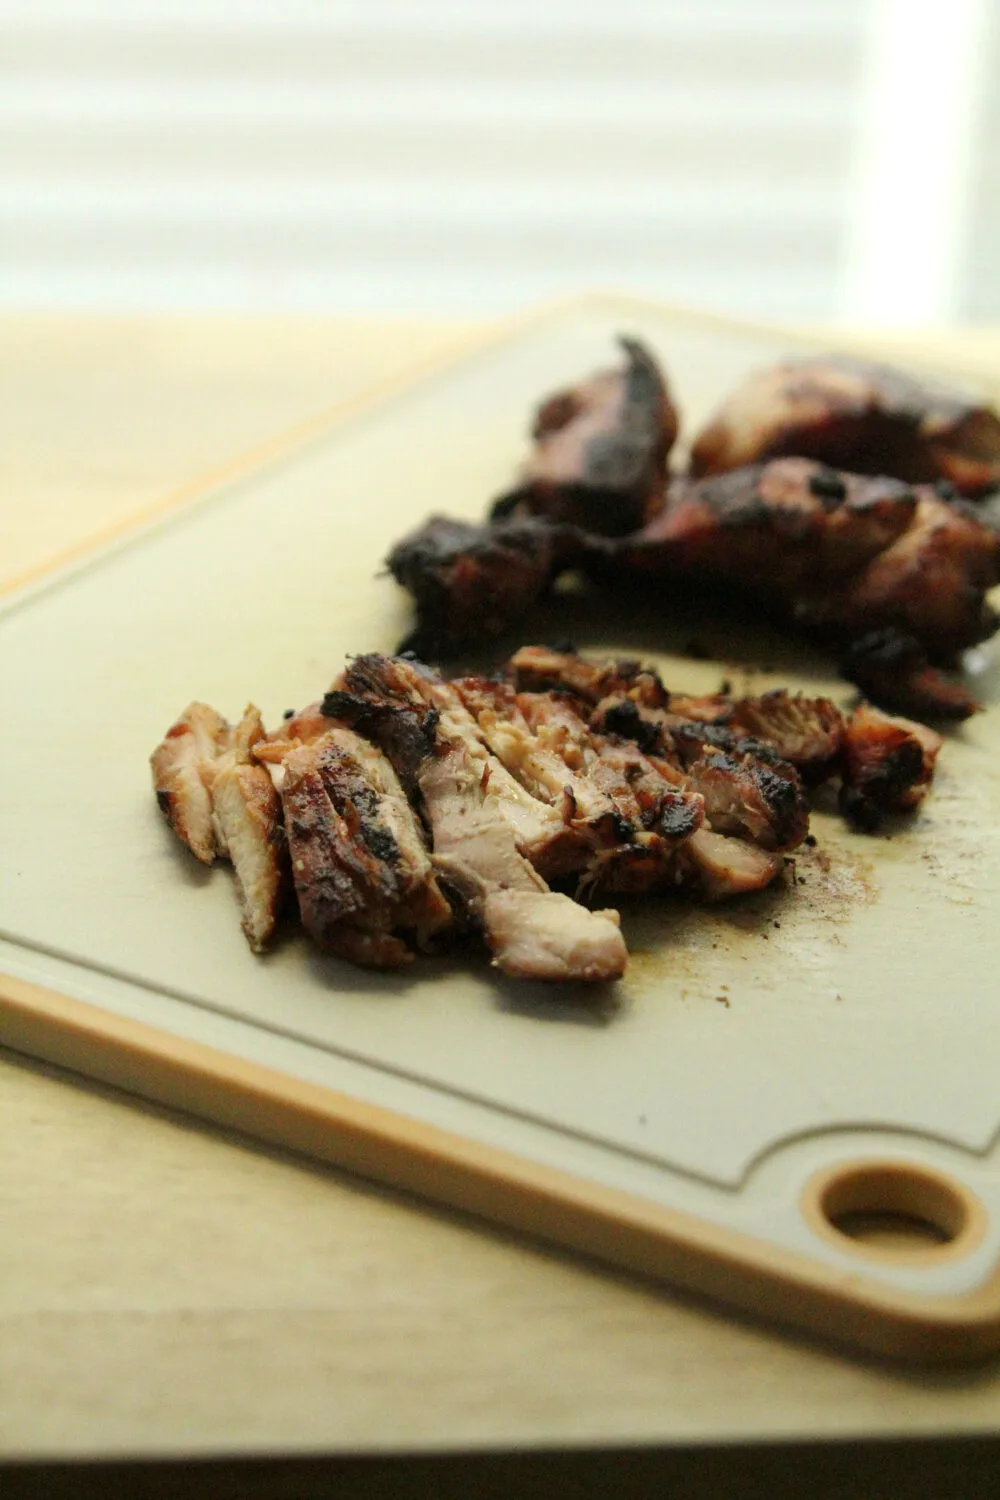 Sliced grilled bourbon chicken thighs are shown on a cutting board.